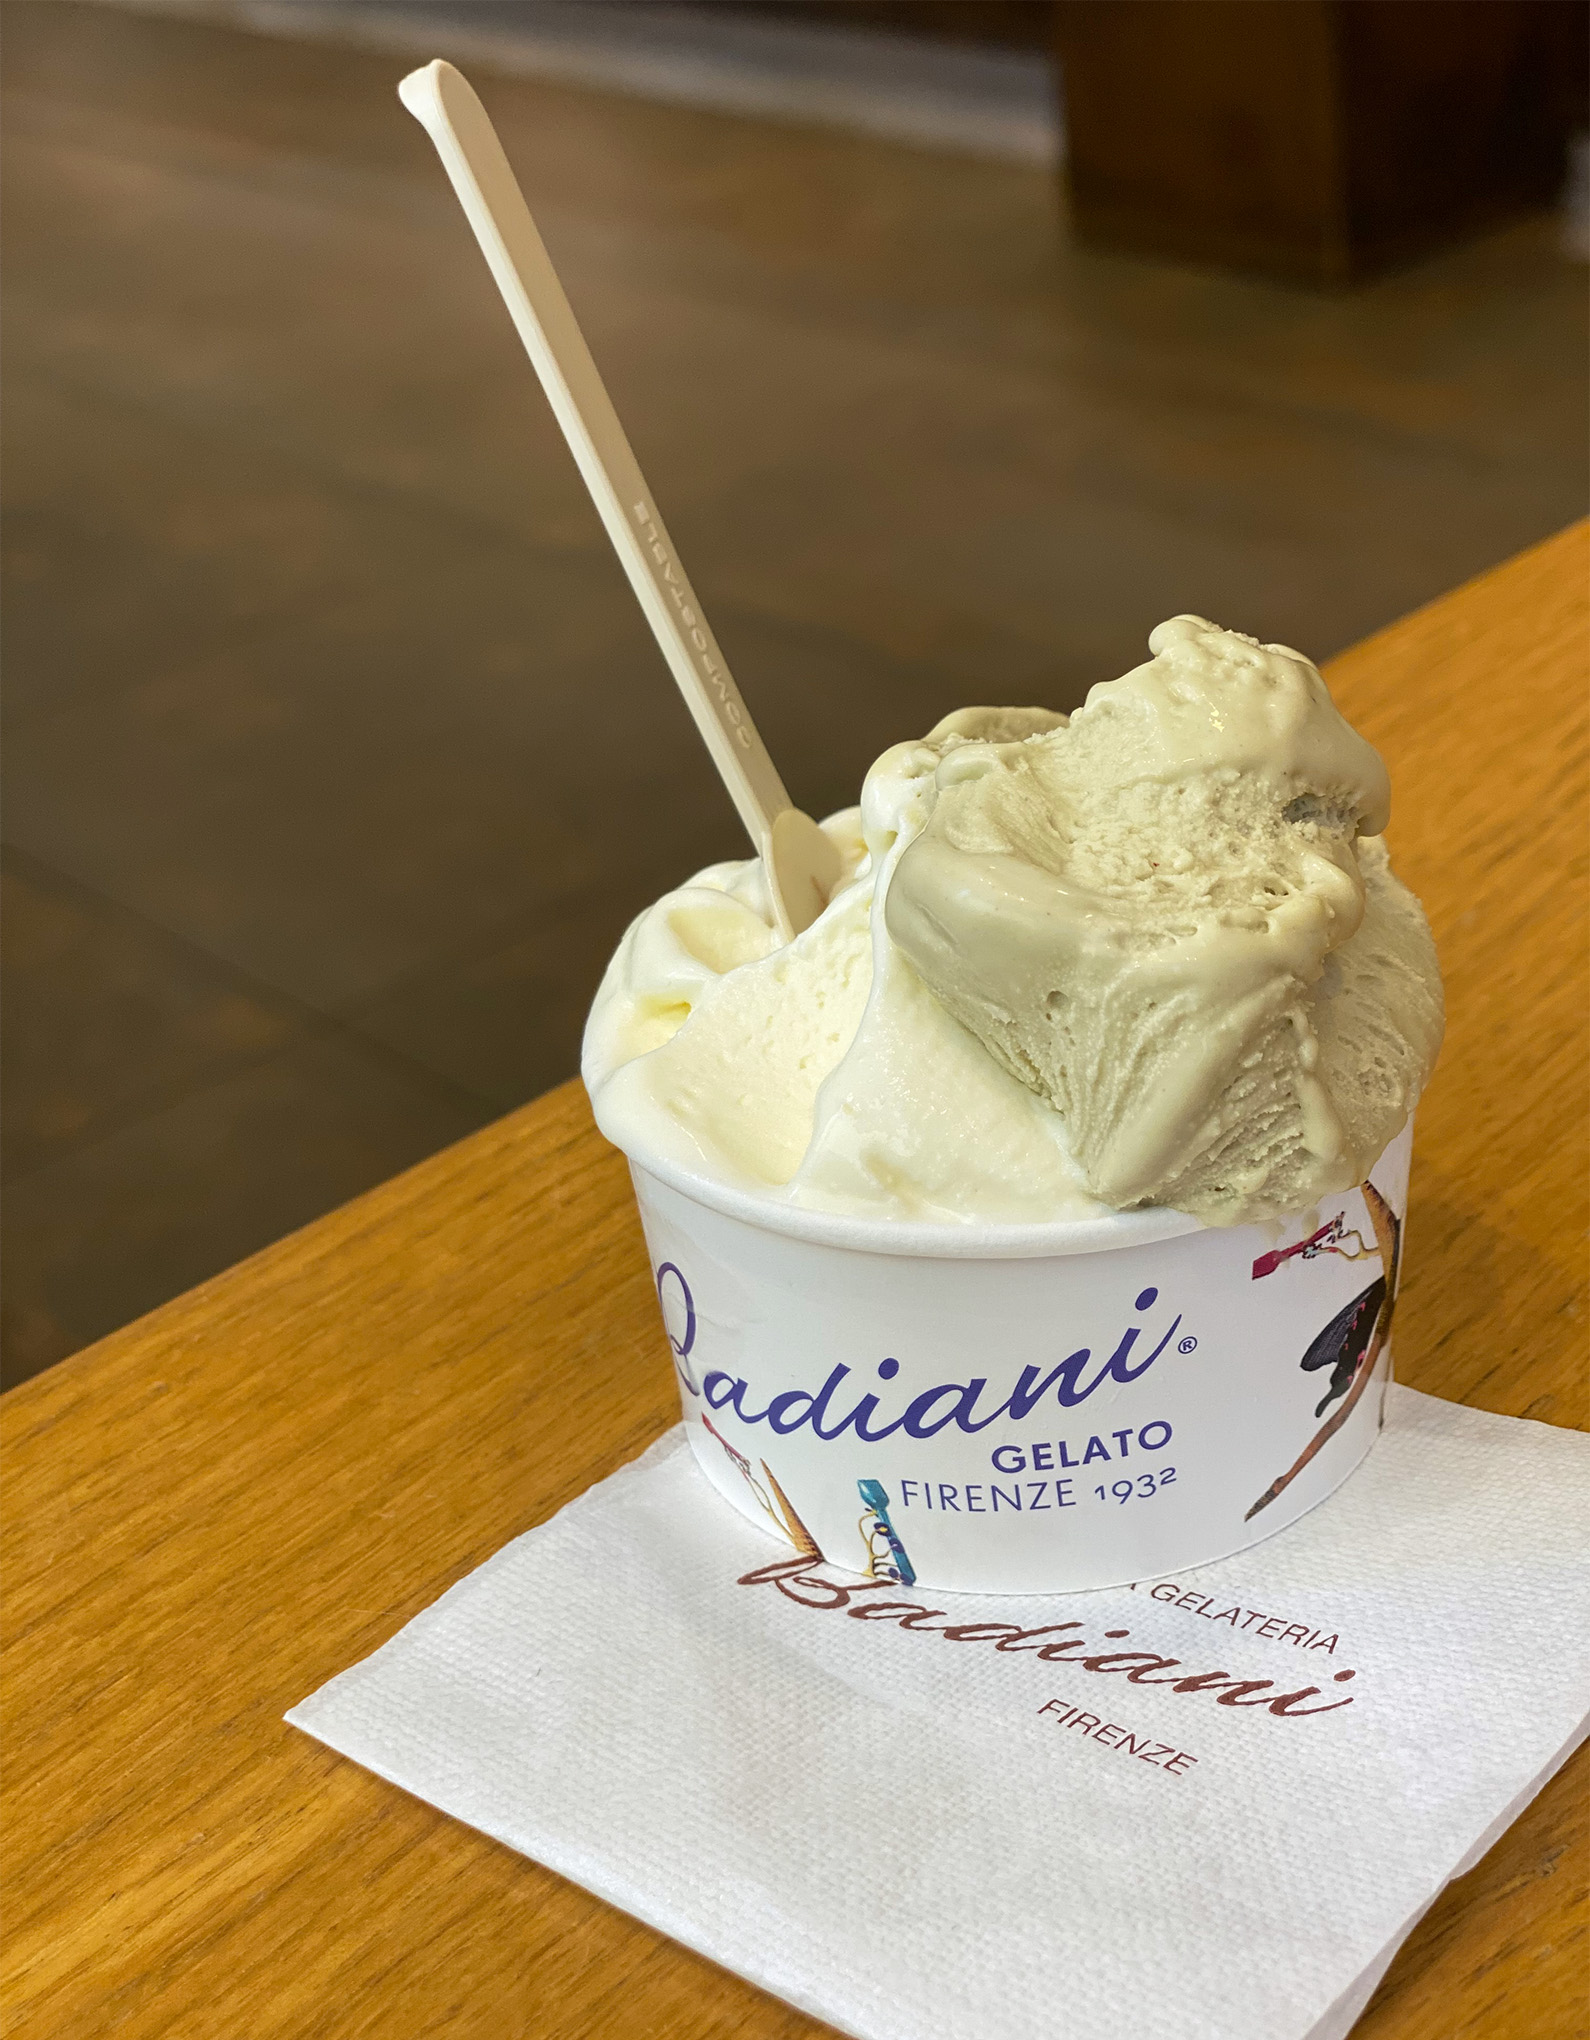 The famous gelato Buontalenti from the gelateria Badiani in Florence